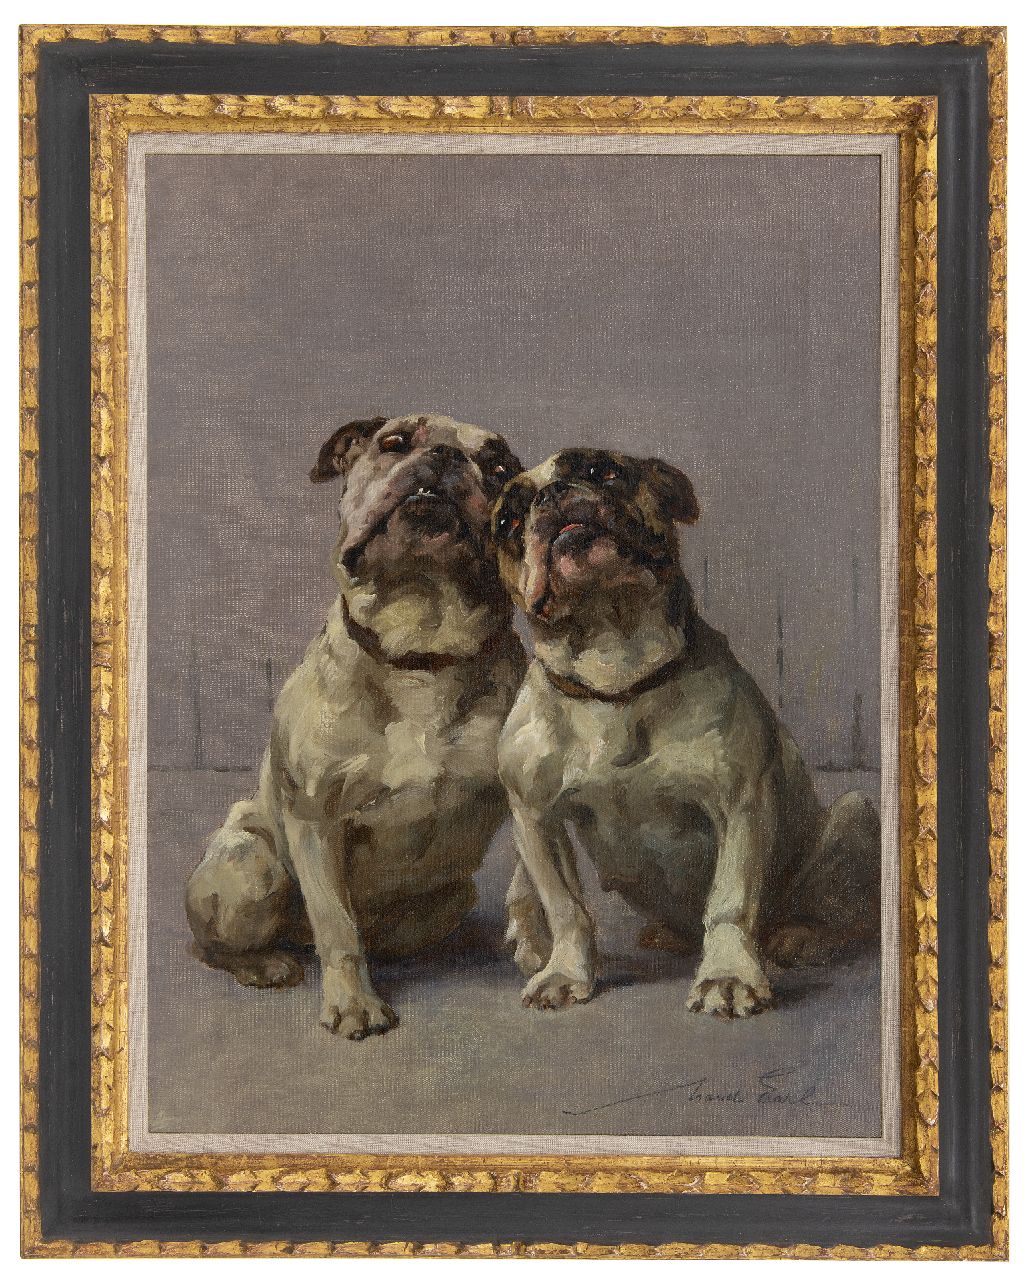 Earl M.A.  | 'Maud' Alice Earl | Paintings offered for sale | Bulldog buddies, oil on canvas 61.5 x 45.9 cm, signed l.r.